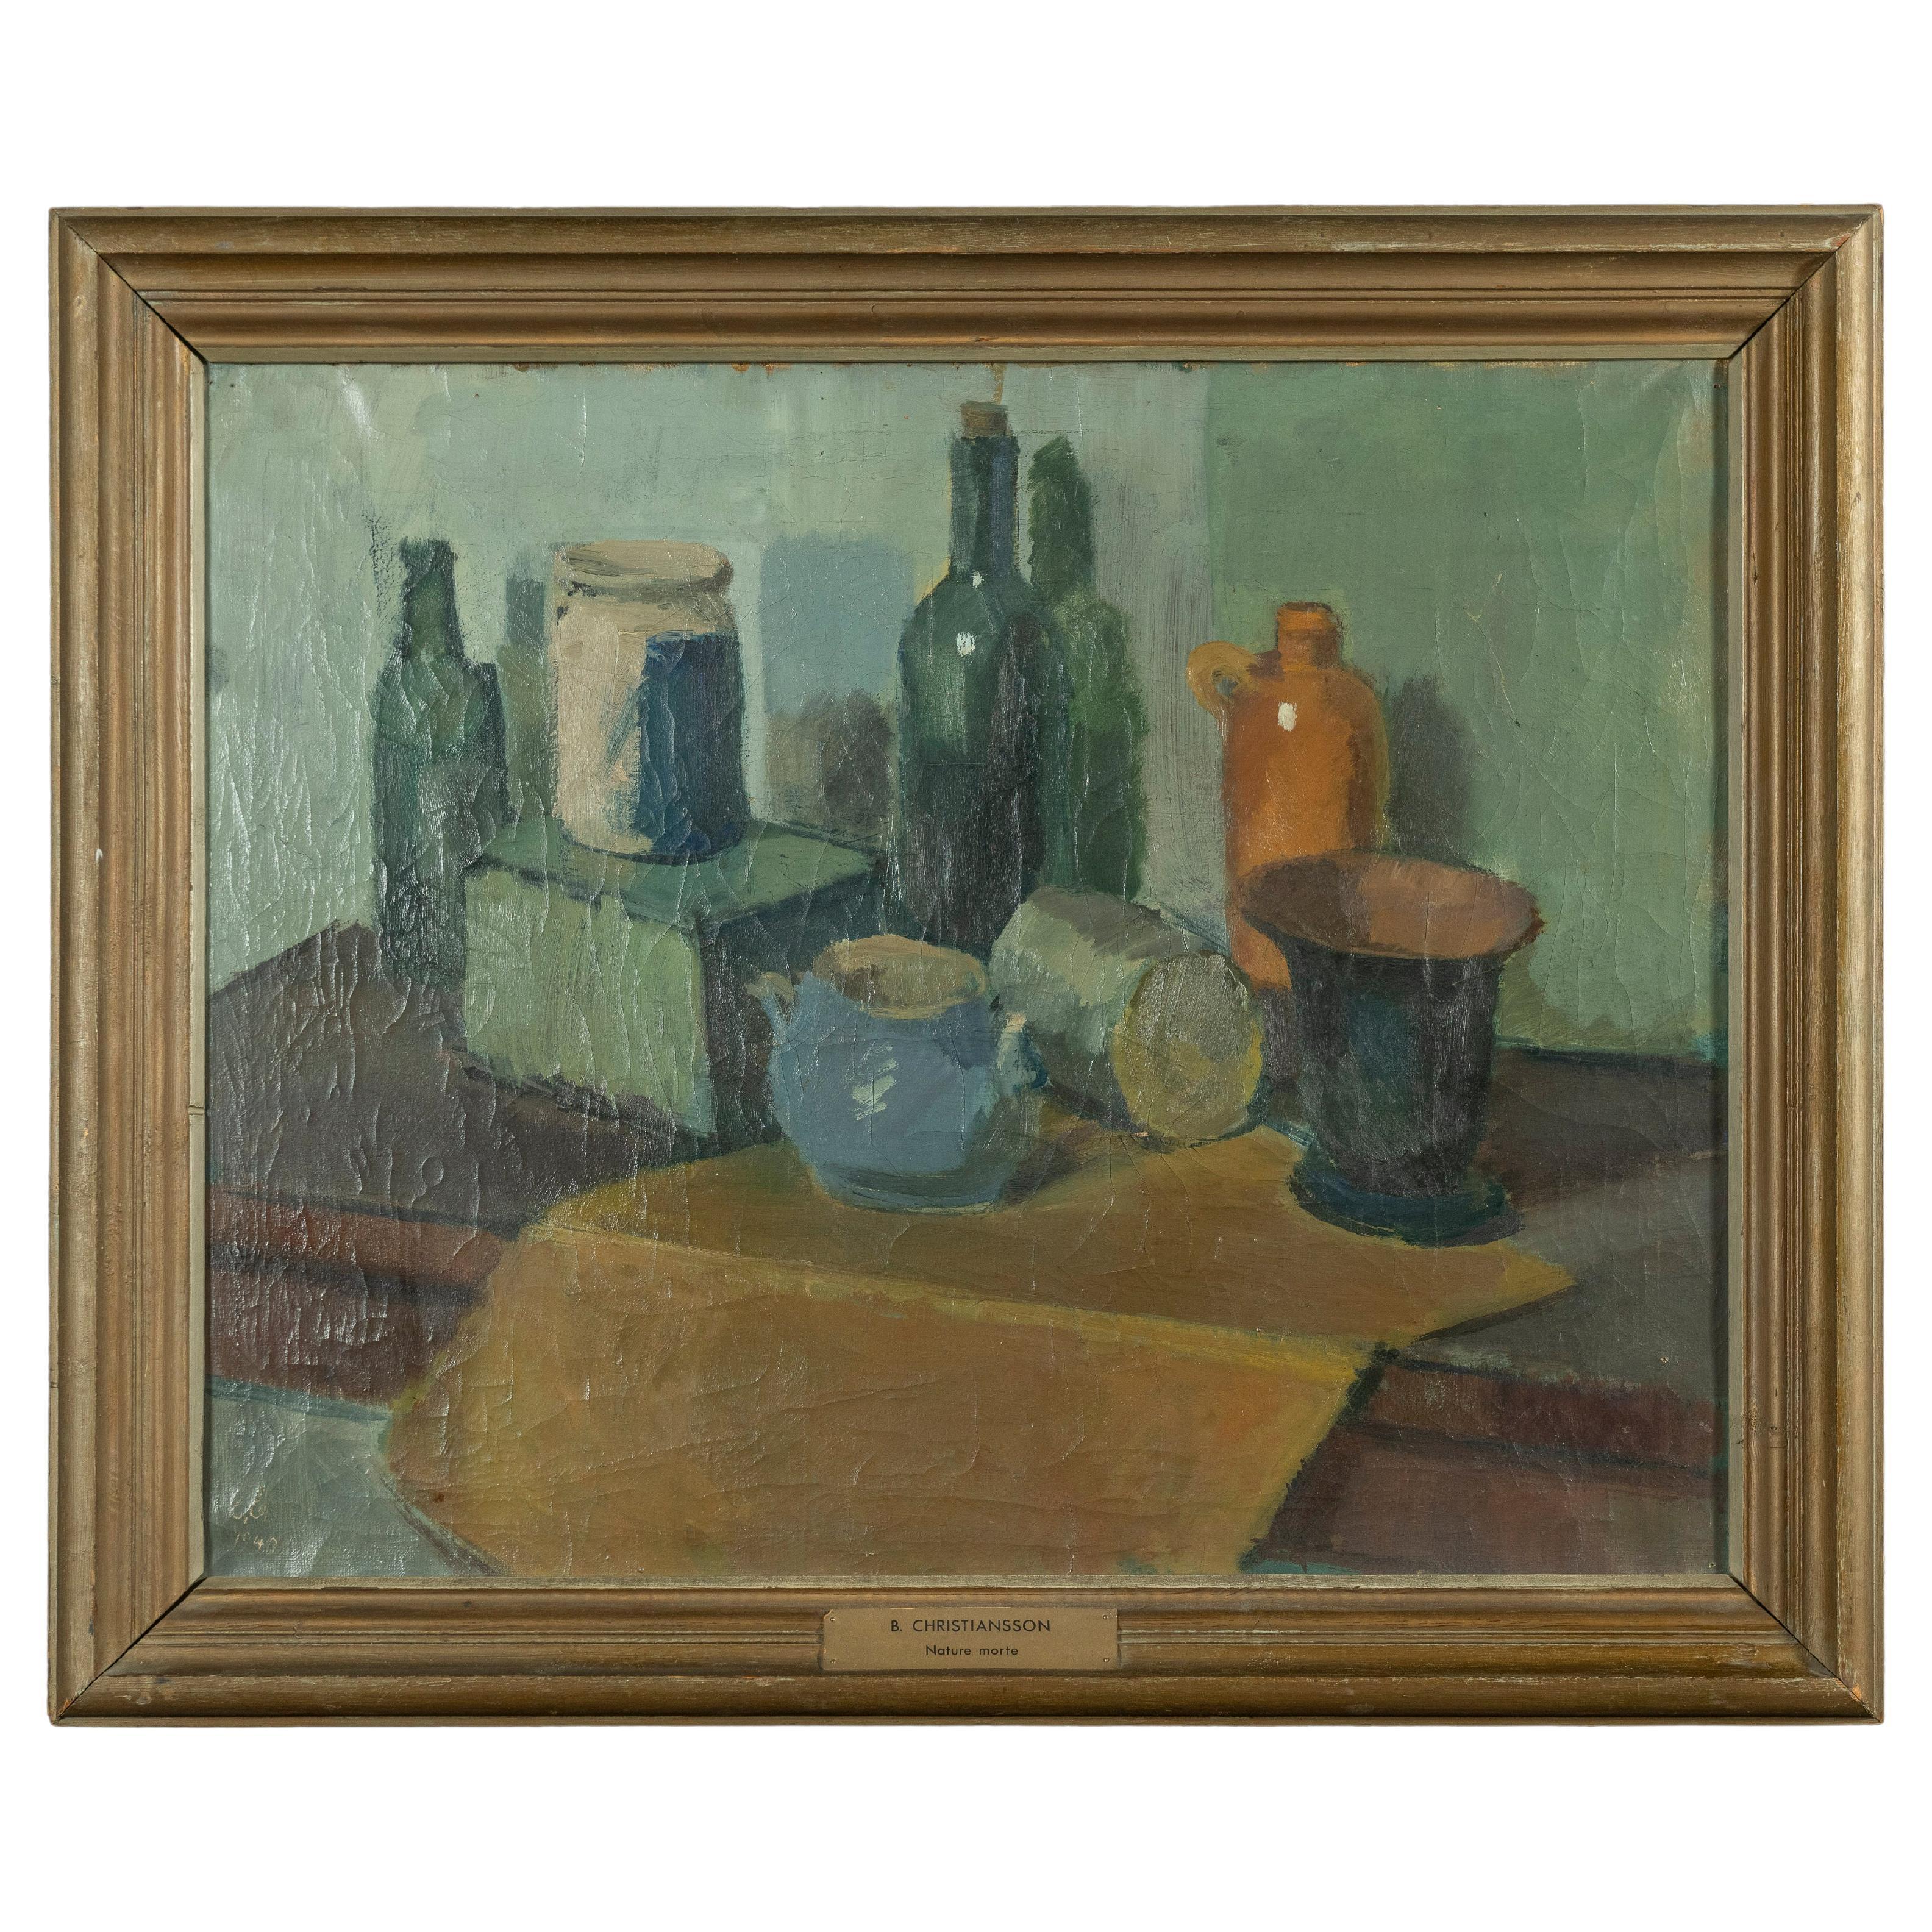 Vintage Midcentury Still Life Oil Painting Framed & Signed by B. Christiansson